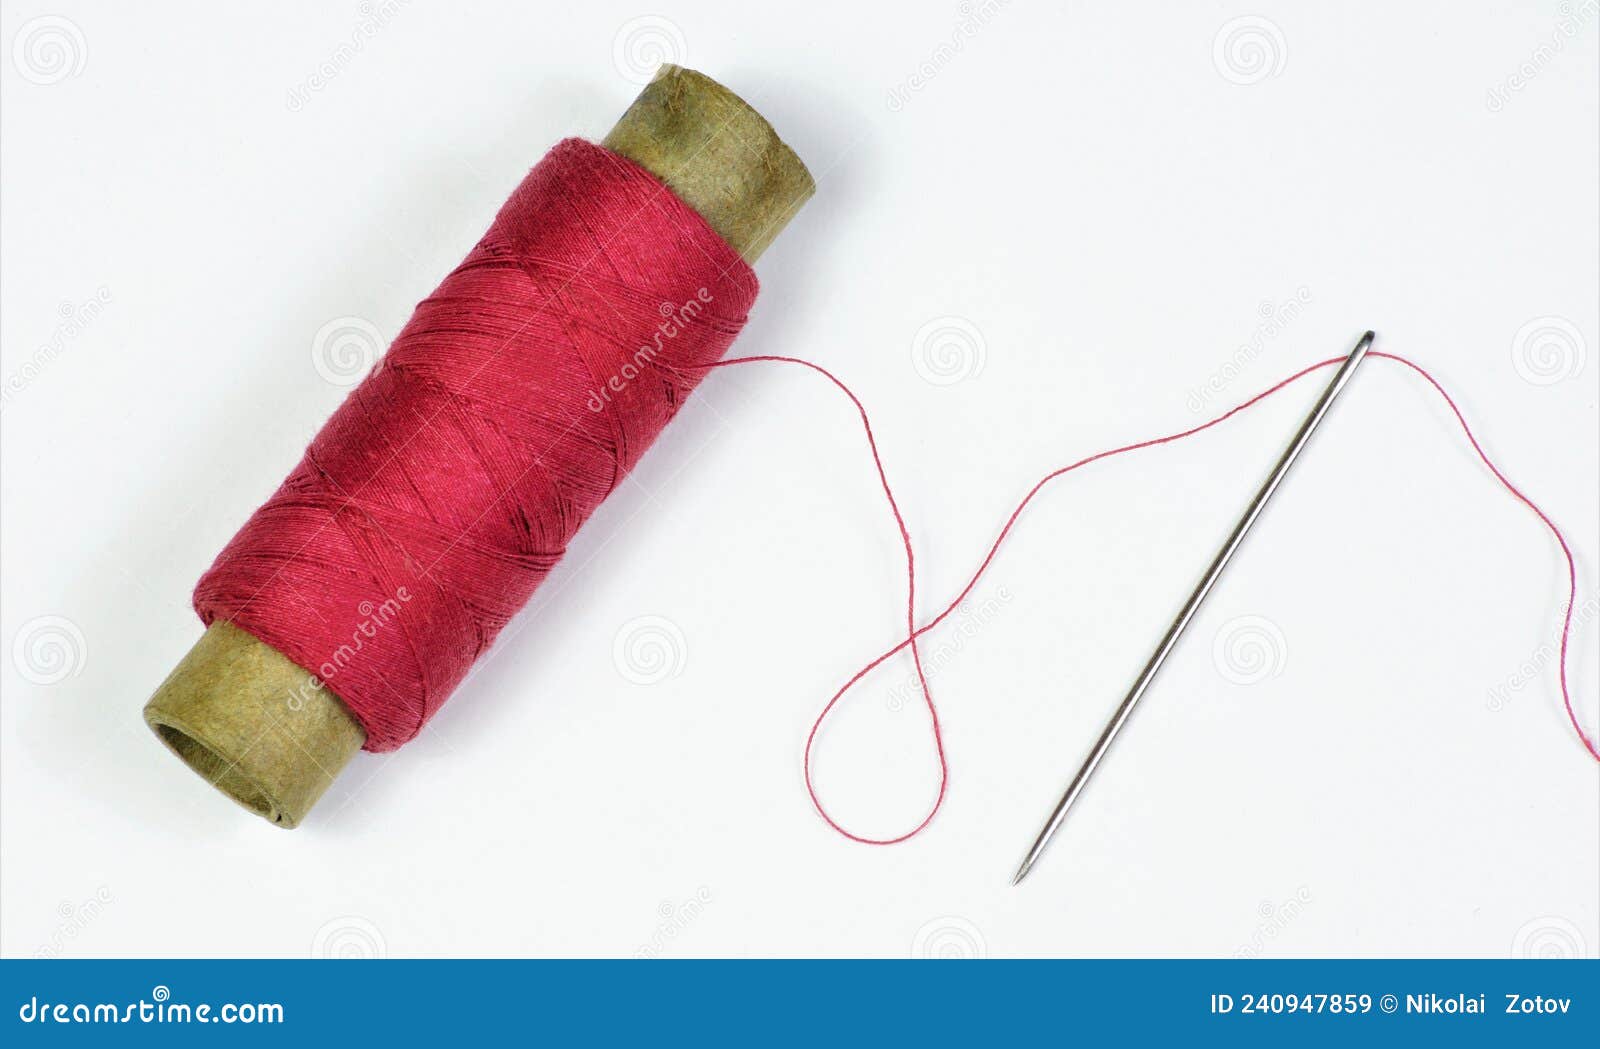 The Sewing Needle is a Pointed Tool and a Red Thread Threaded into the ...